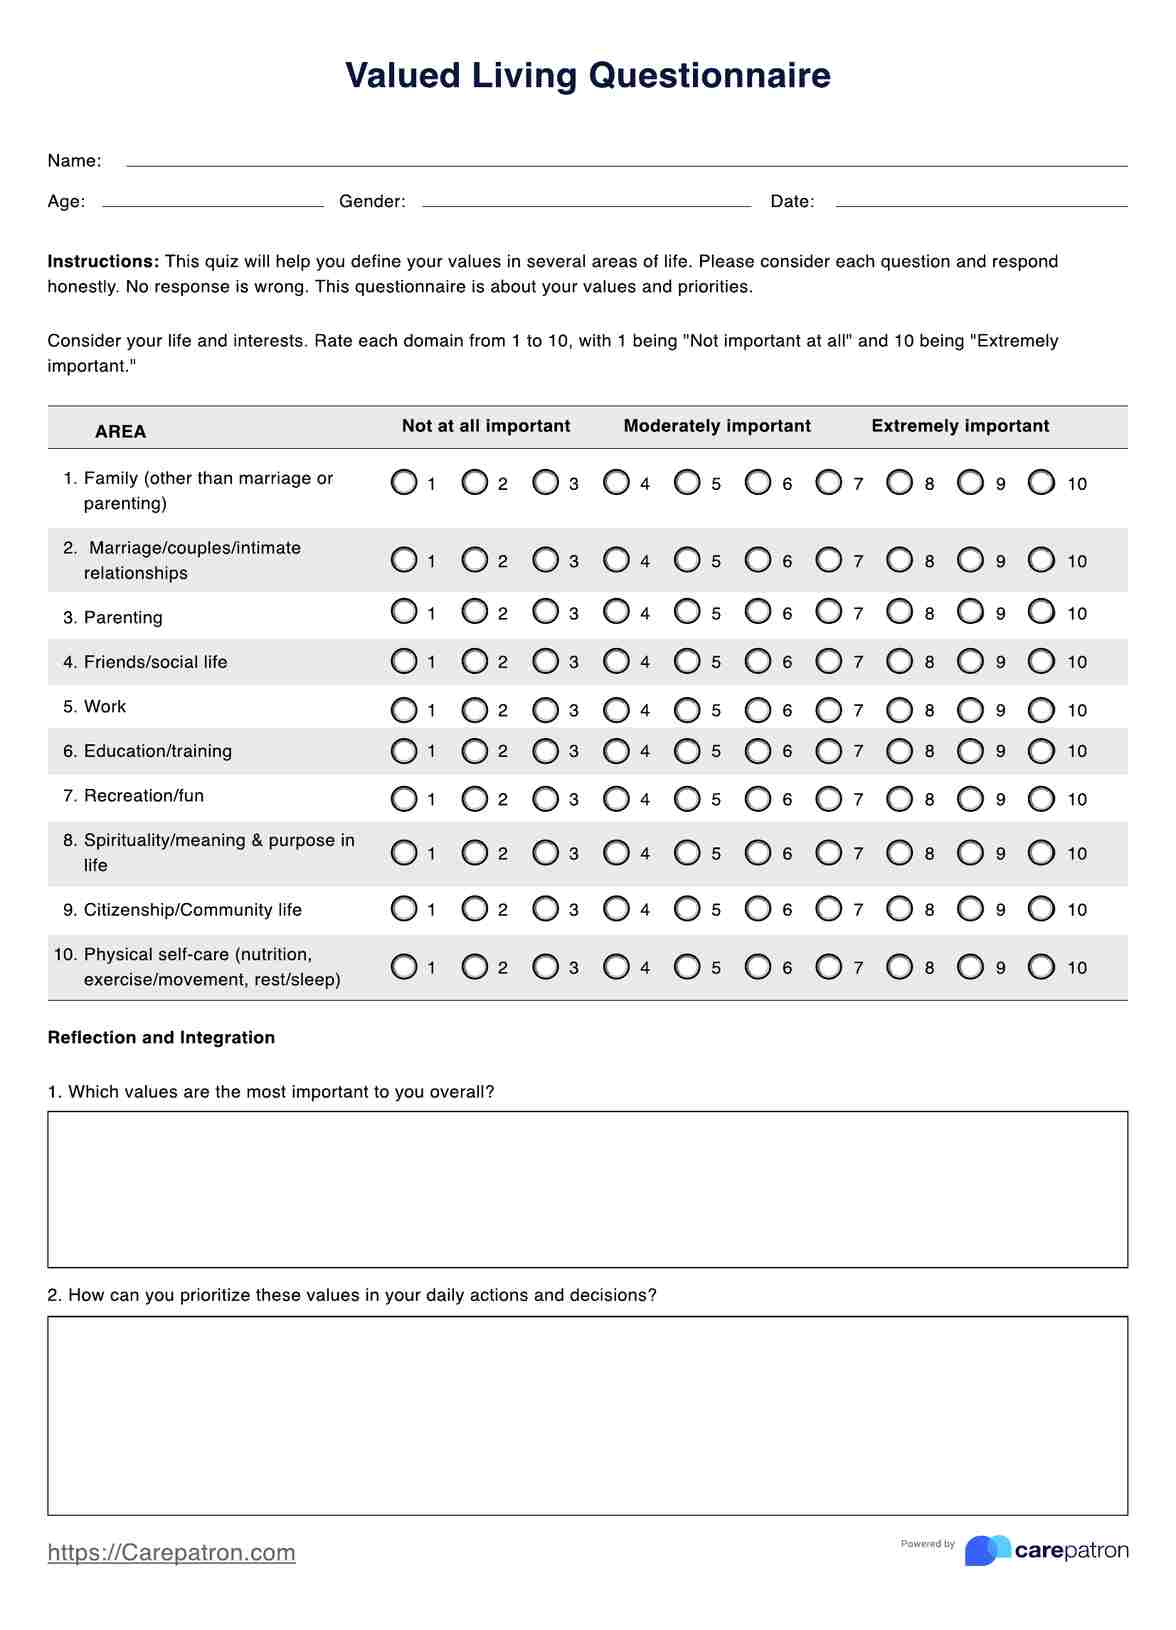 Valued Living Questionnaire PDF Example